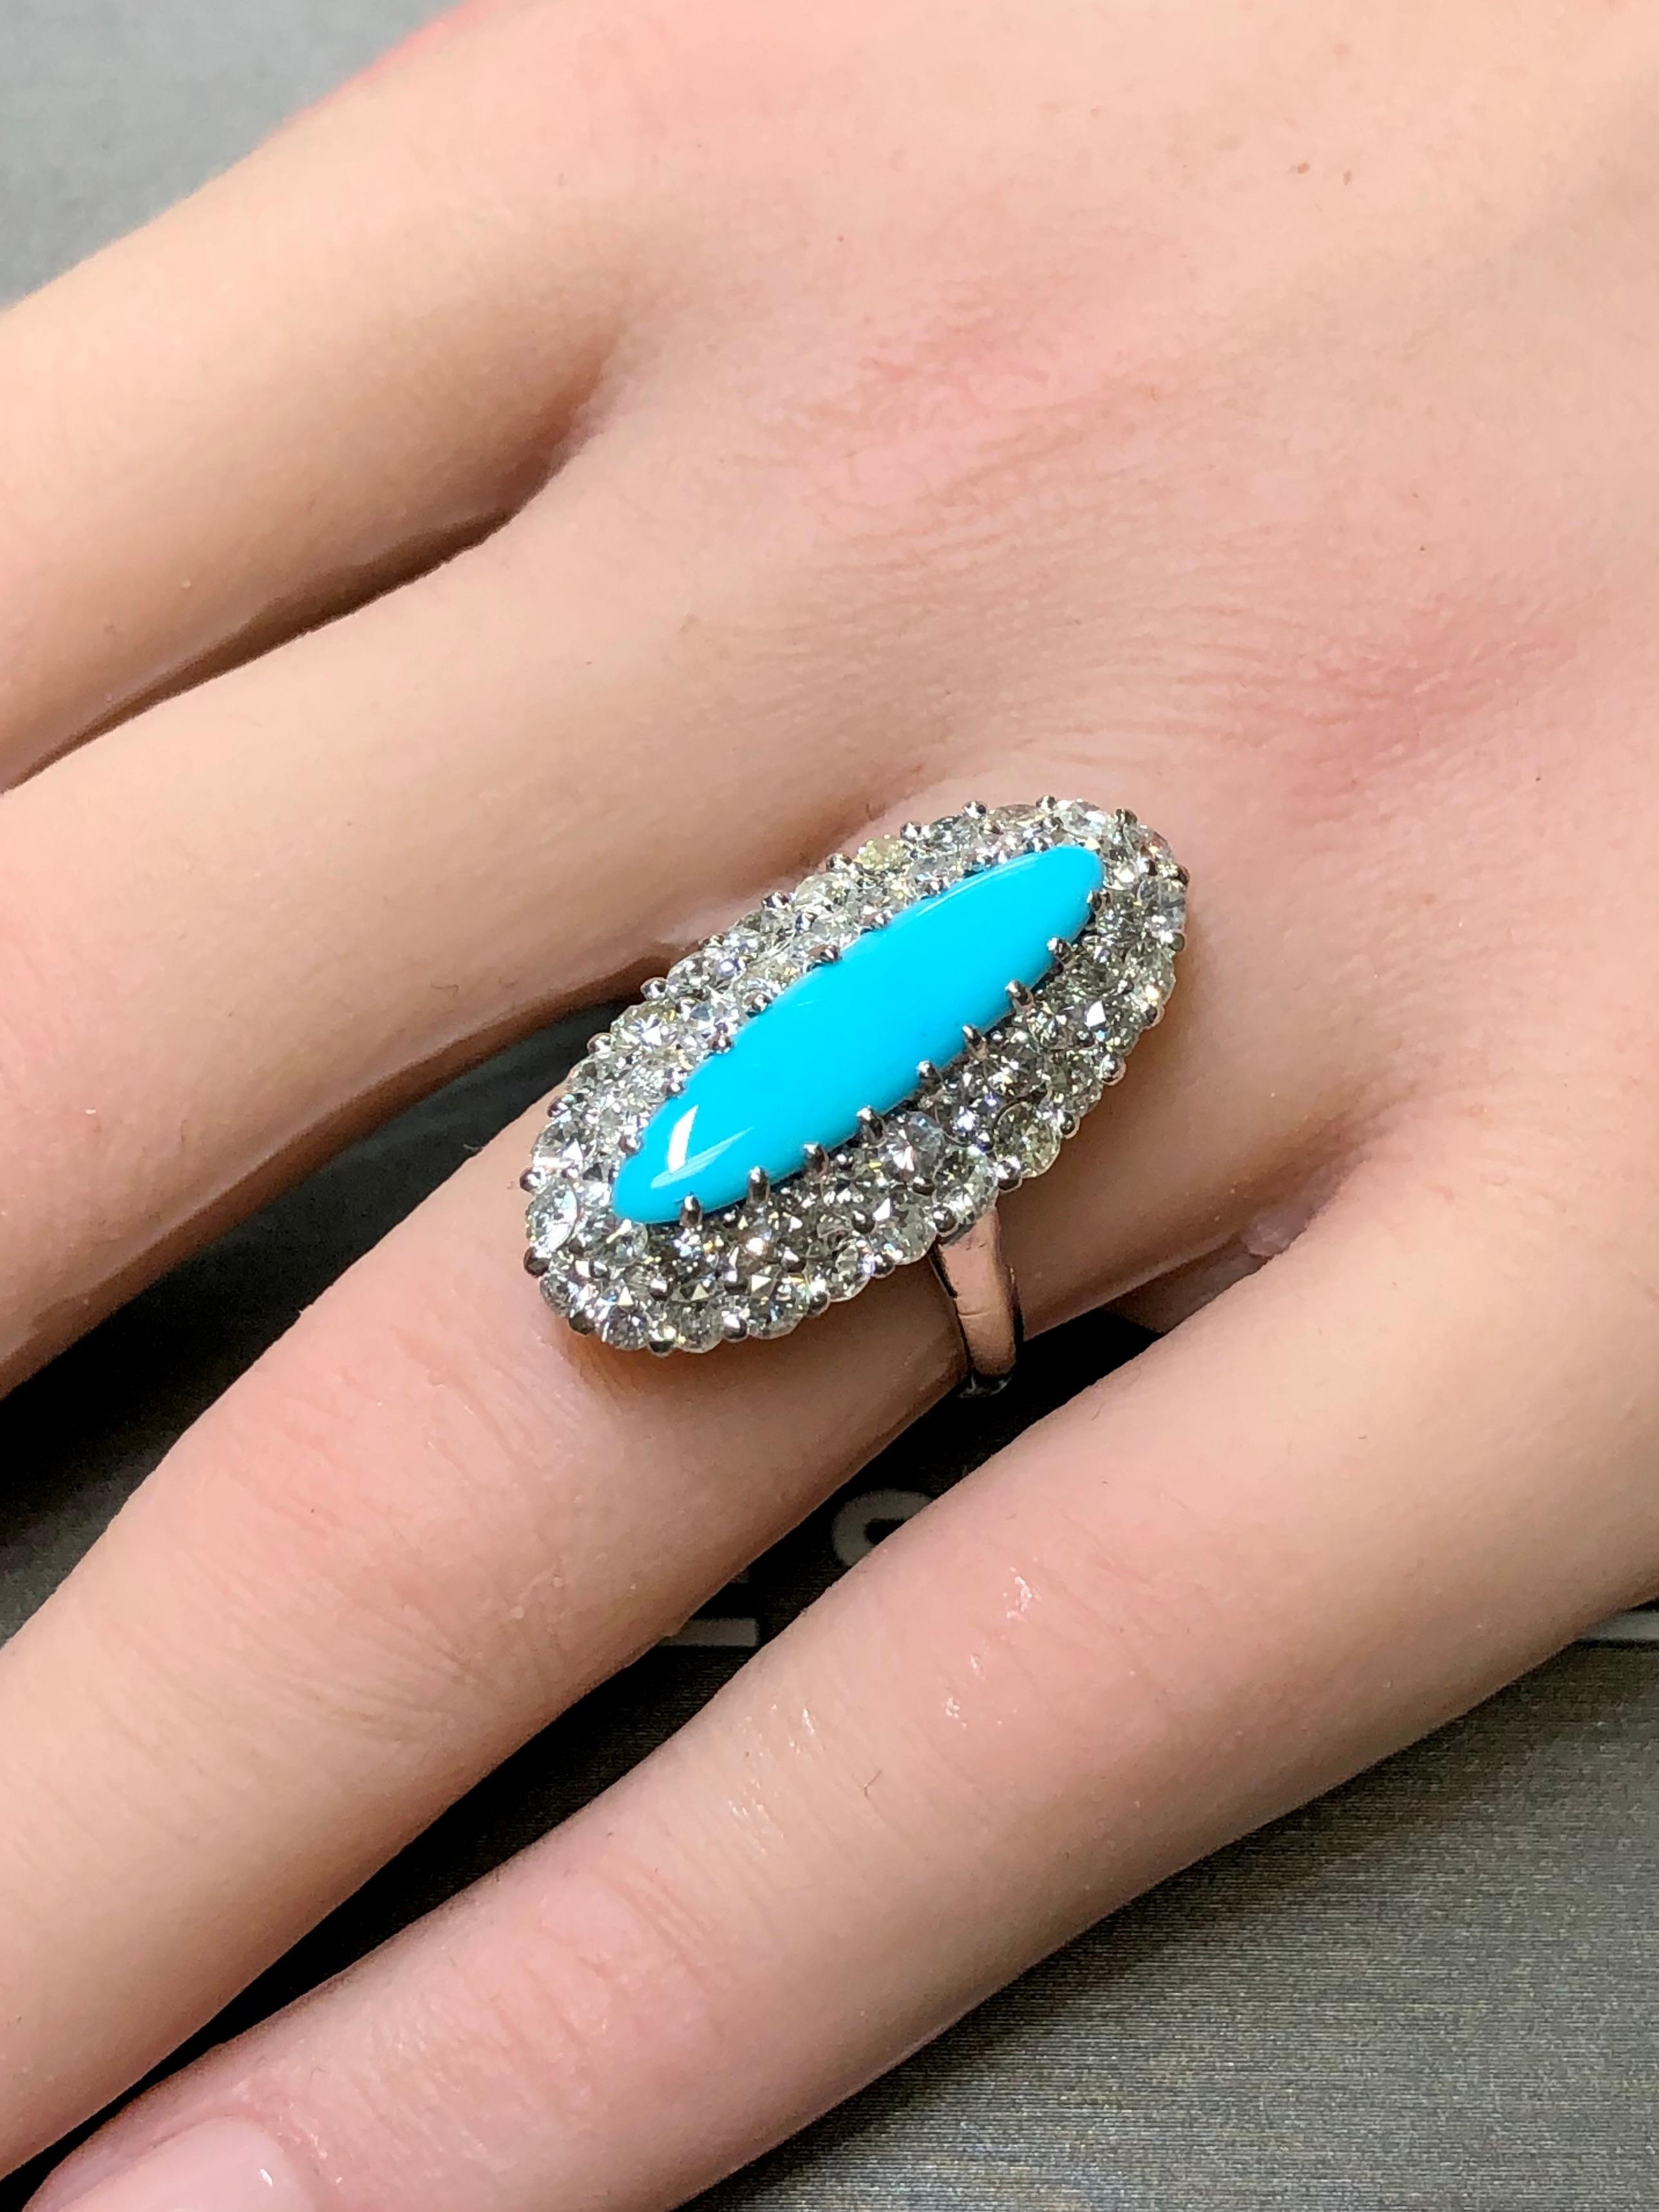 Vintage 18K Cabochon Turquoise European Diamond Navette Cocktail Ring 2.78cttw In Good Condition For Sale In Winter Springs, FL